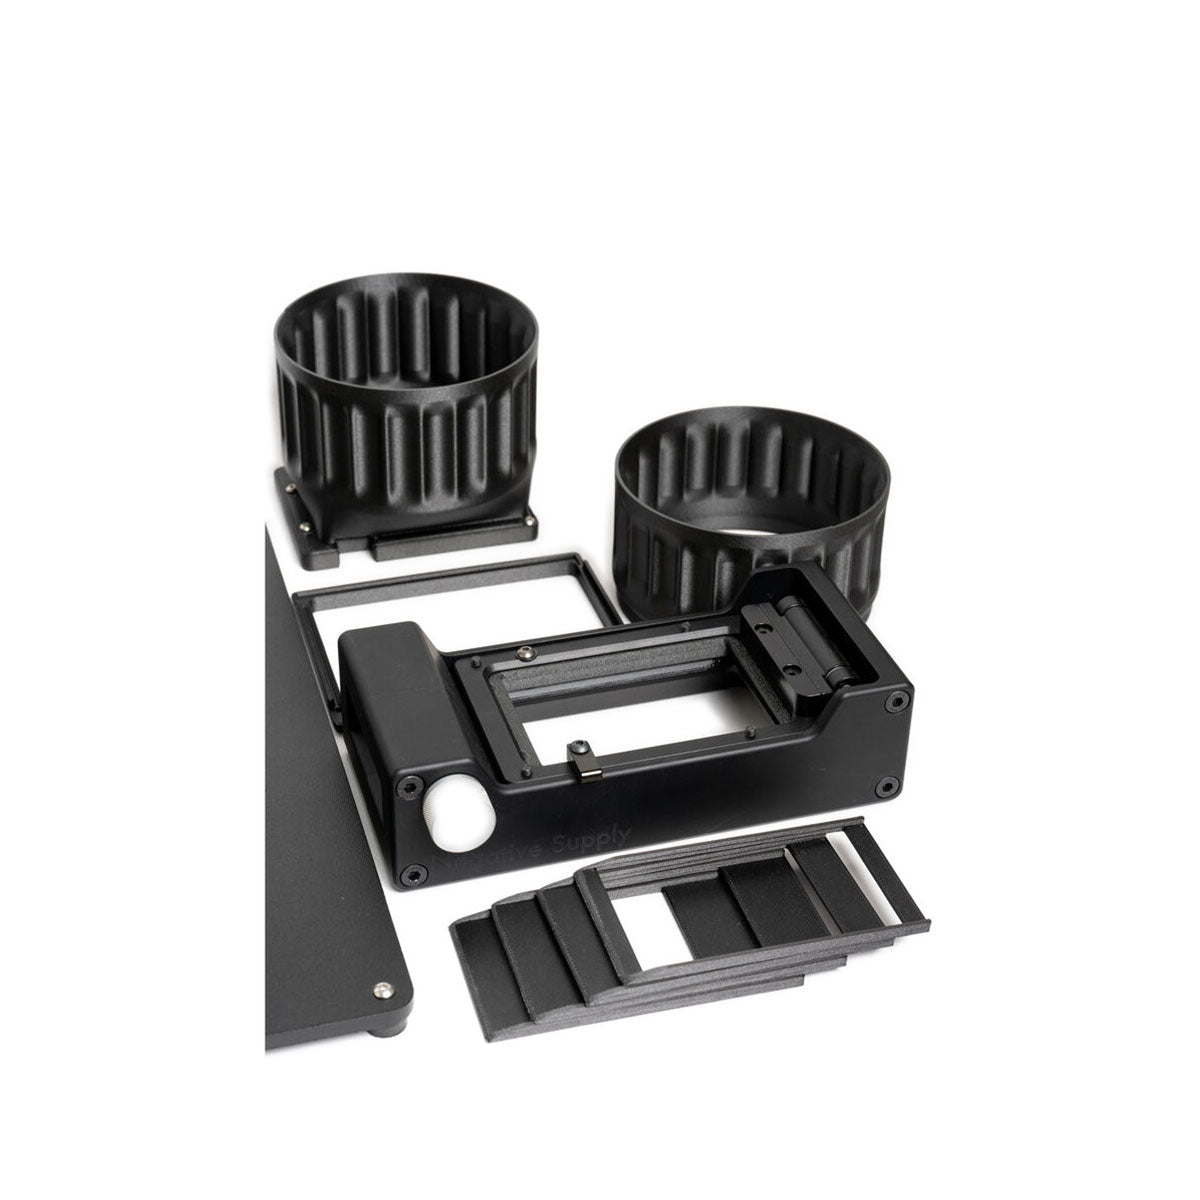 Negative Supply Premium Curated Kit for 35mm and 120 Film Scanning